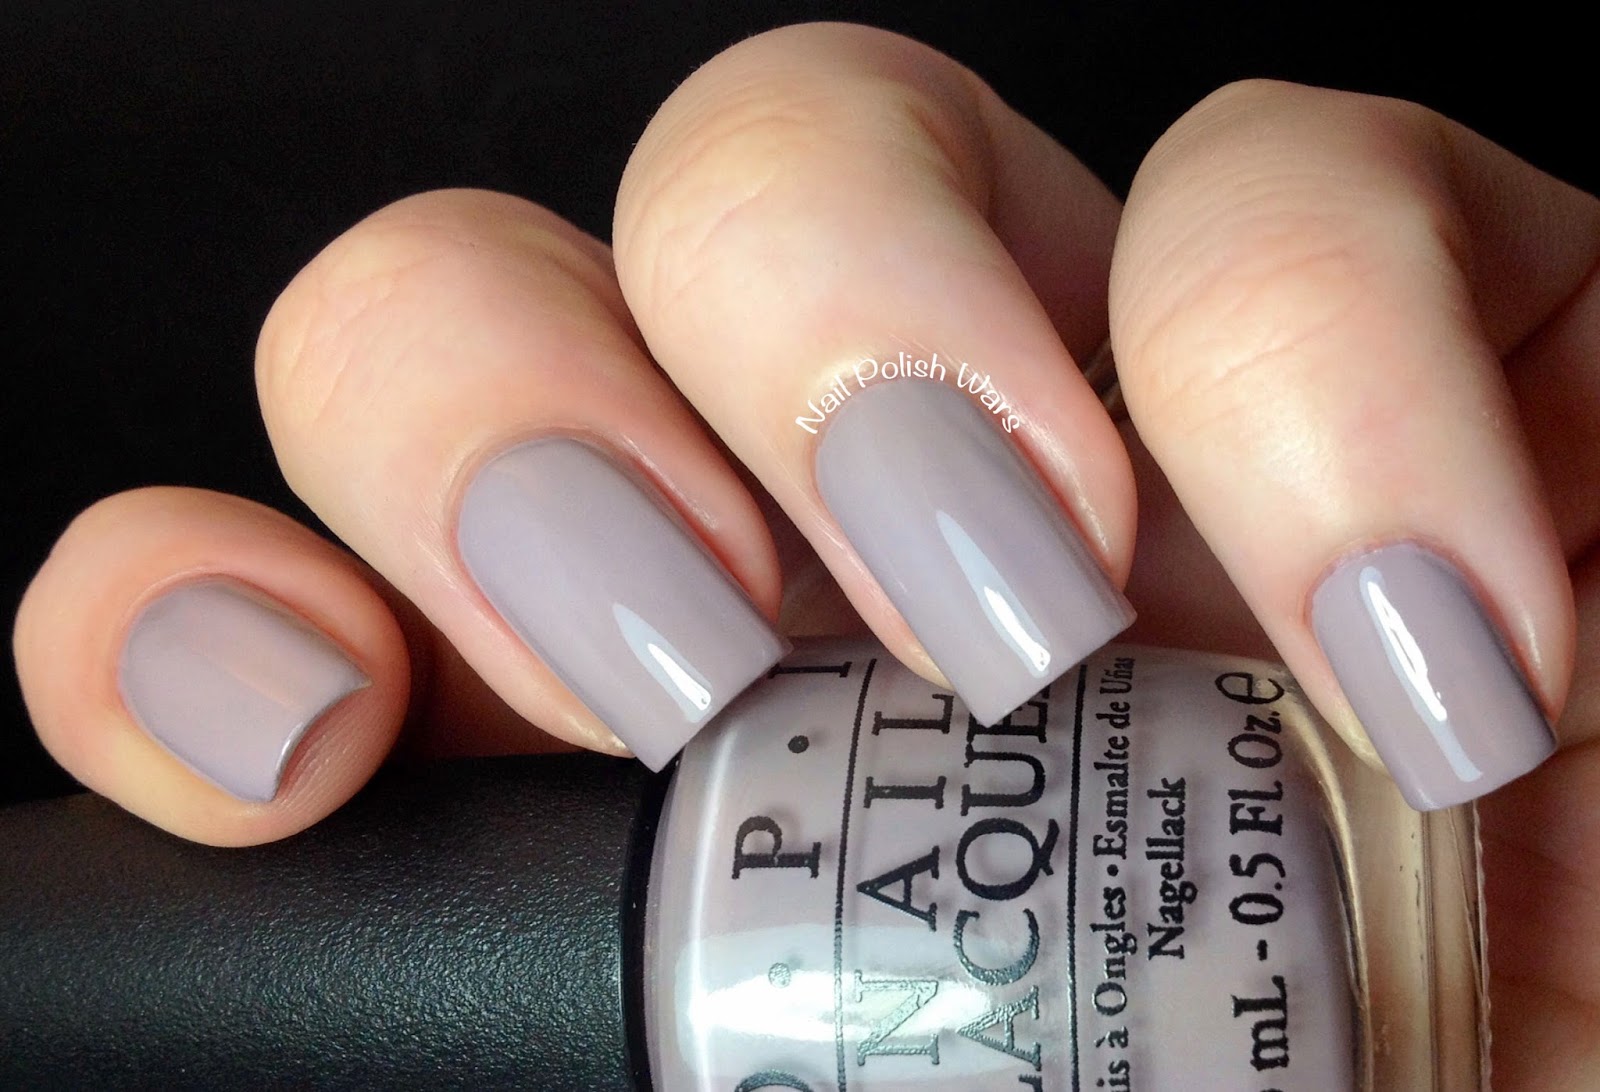 5. OPI GelColor in "Taupe-less Beach" - wide 3